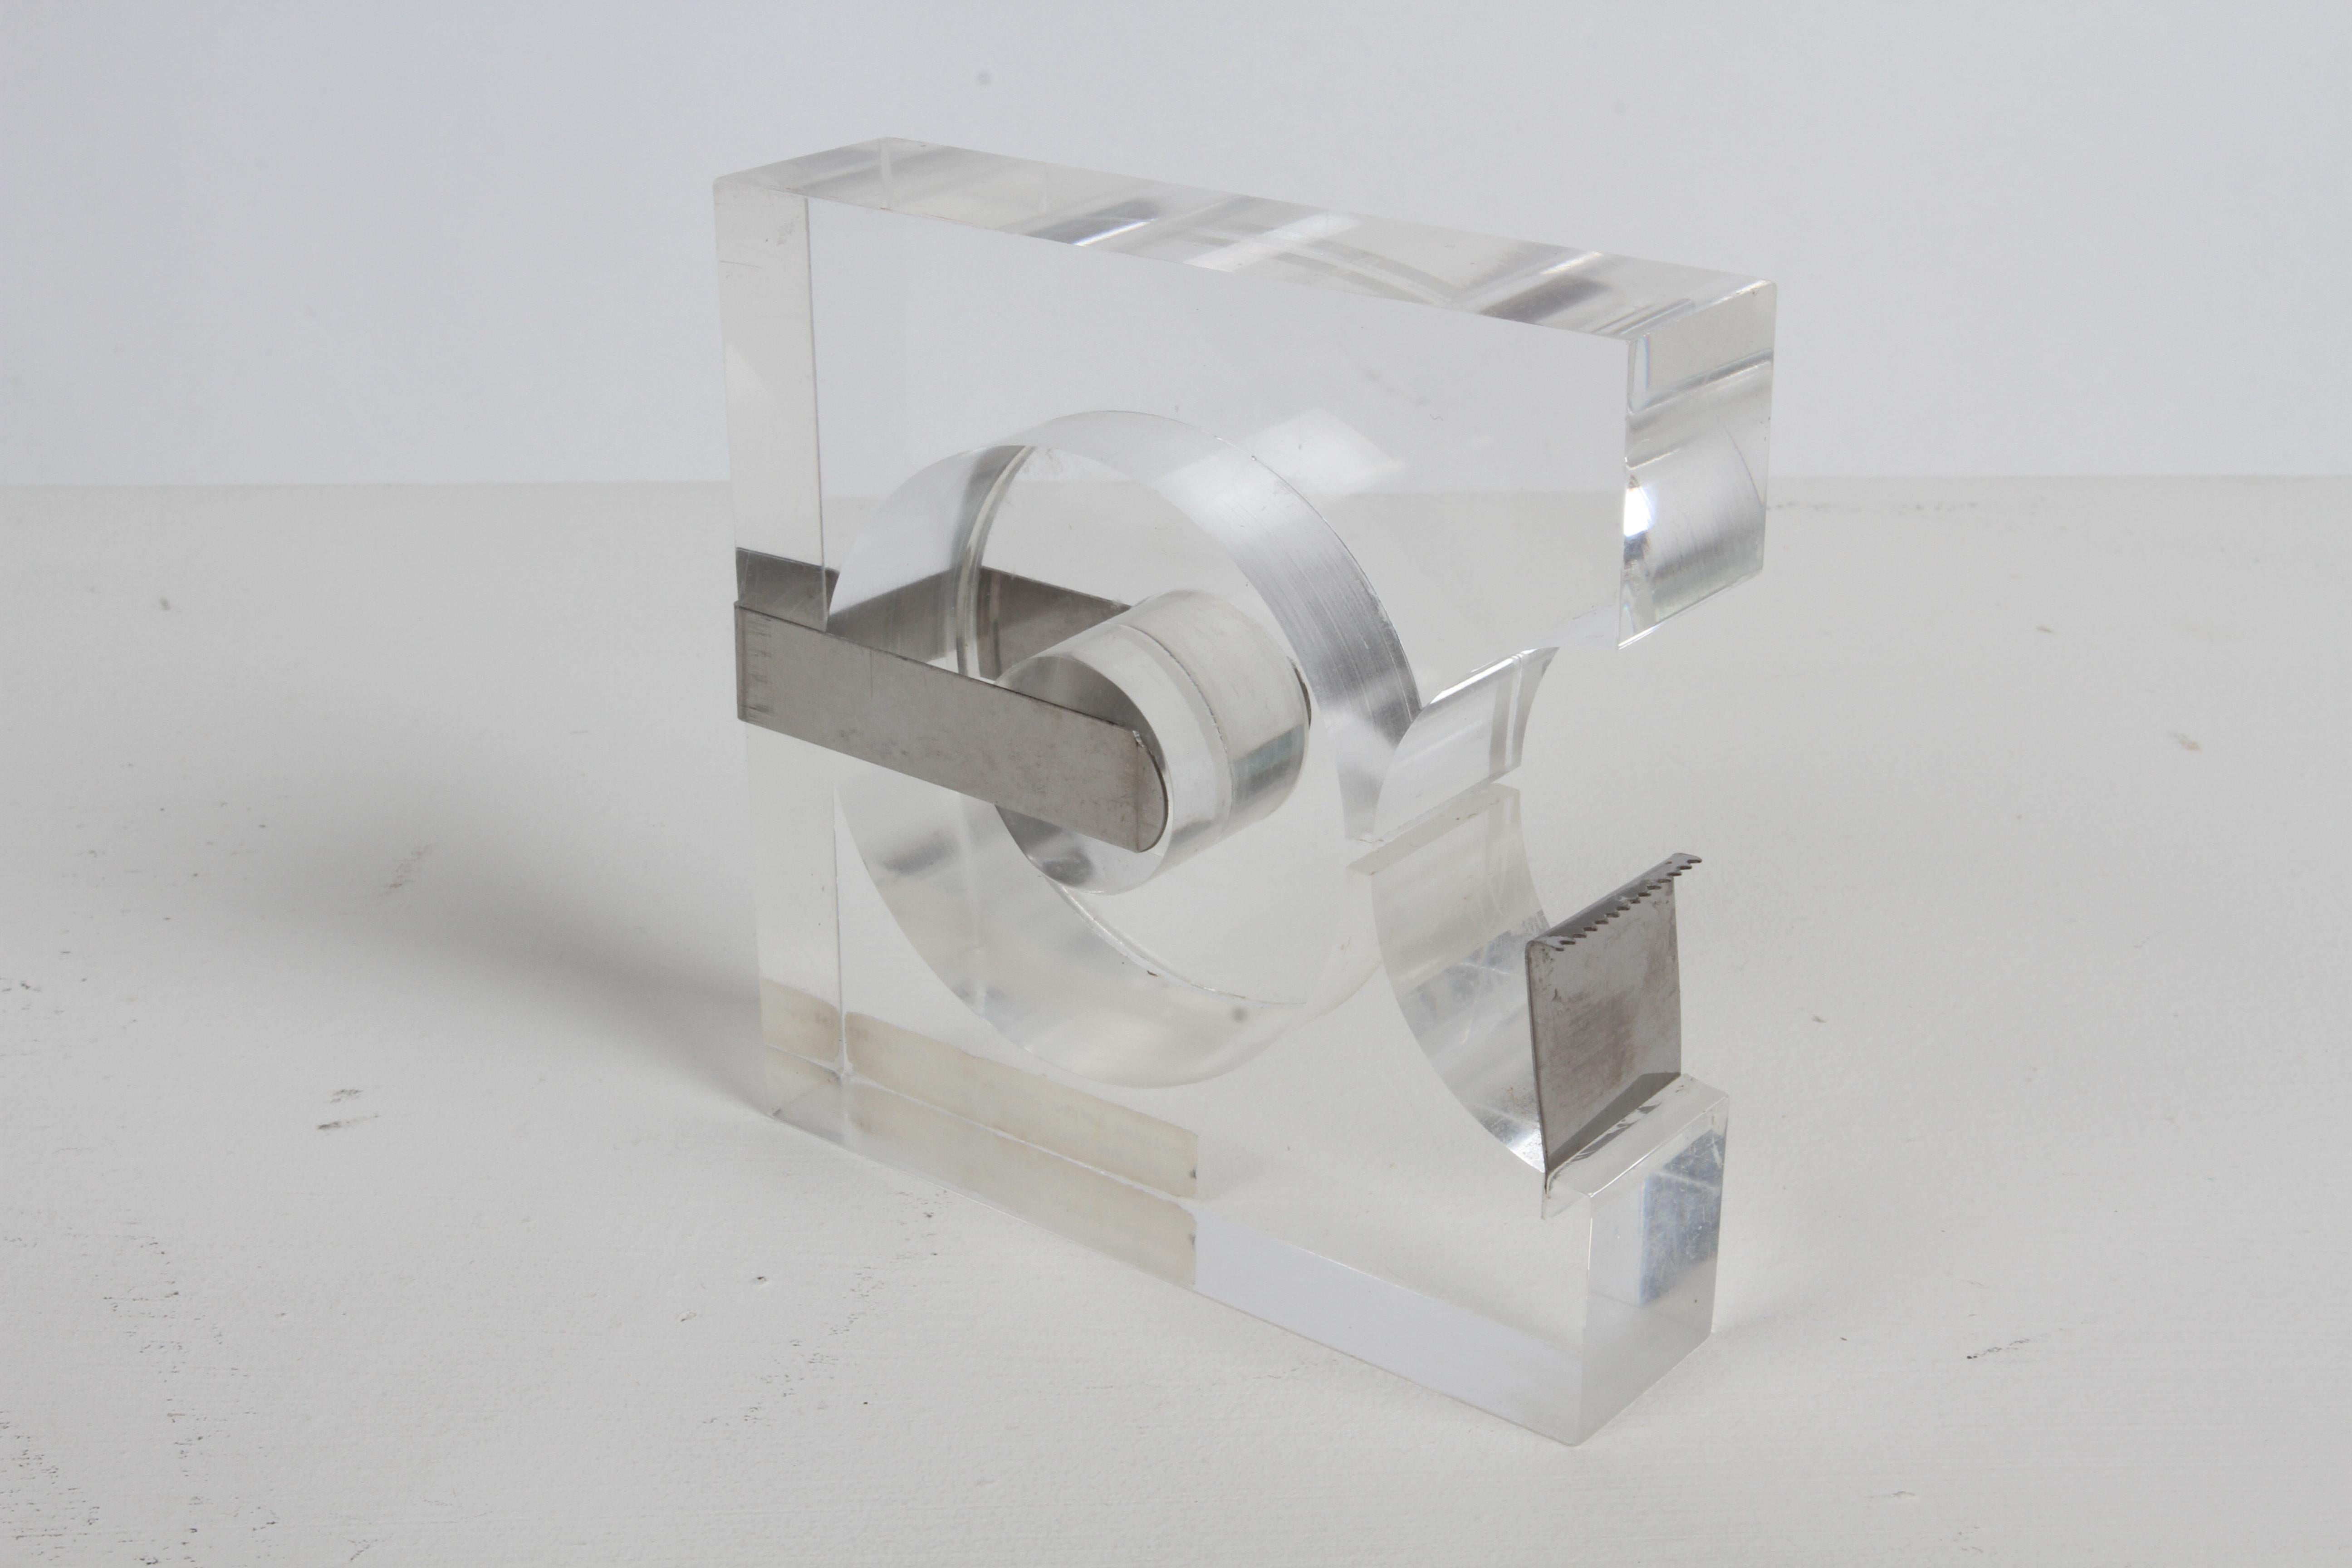 Vintage Robert P. Gottlieb Lucite / Steel Tape Dispenser in production from 1963-73. Two's Company, Mount Vernon, NY.. In the permanent Collection of MOMA New York. In fine working condition, with minor scuffs to Lucite. Label with MOMA collection